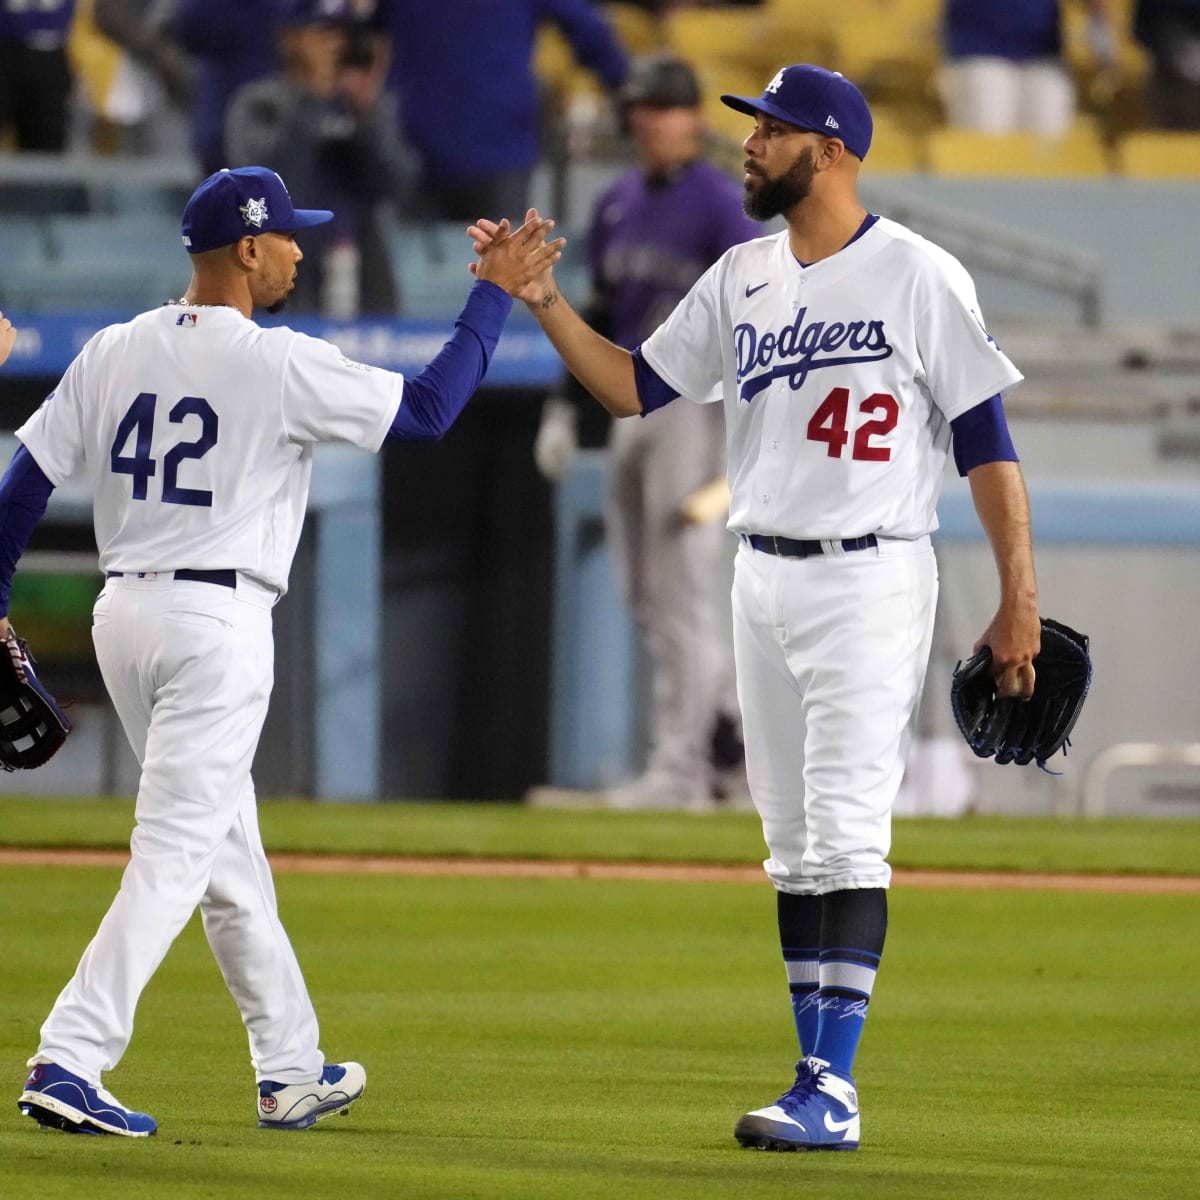 Former Dodger David Price Reveals His Favorite MLB Player, and